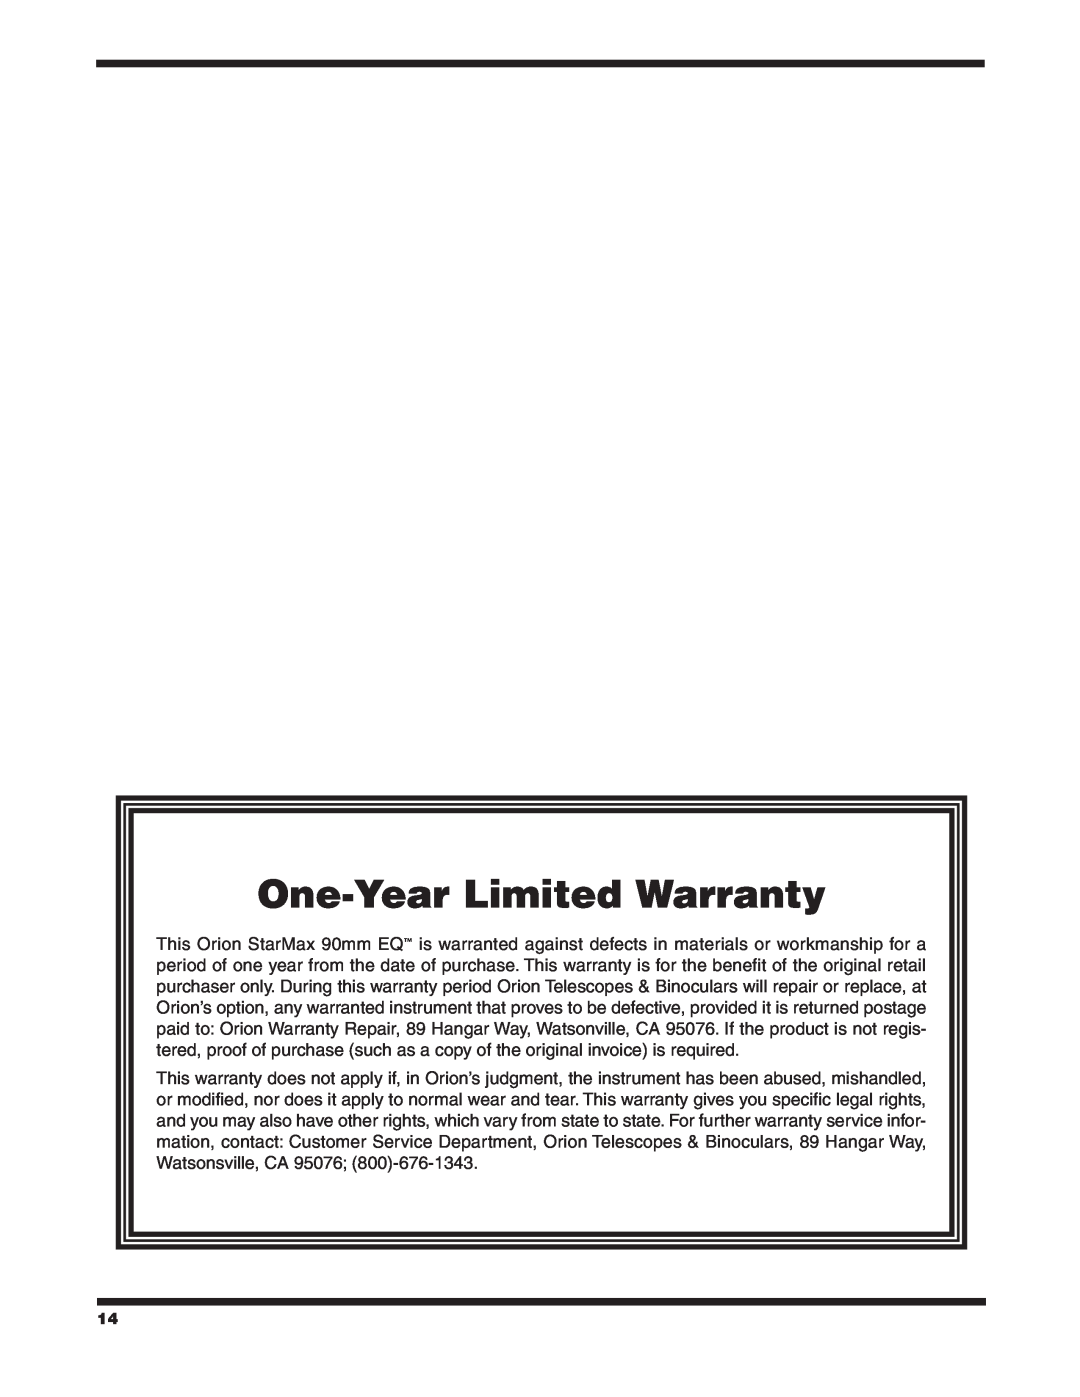 Orion 90 EQ instruction manual One-Year Limited Warranty 